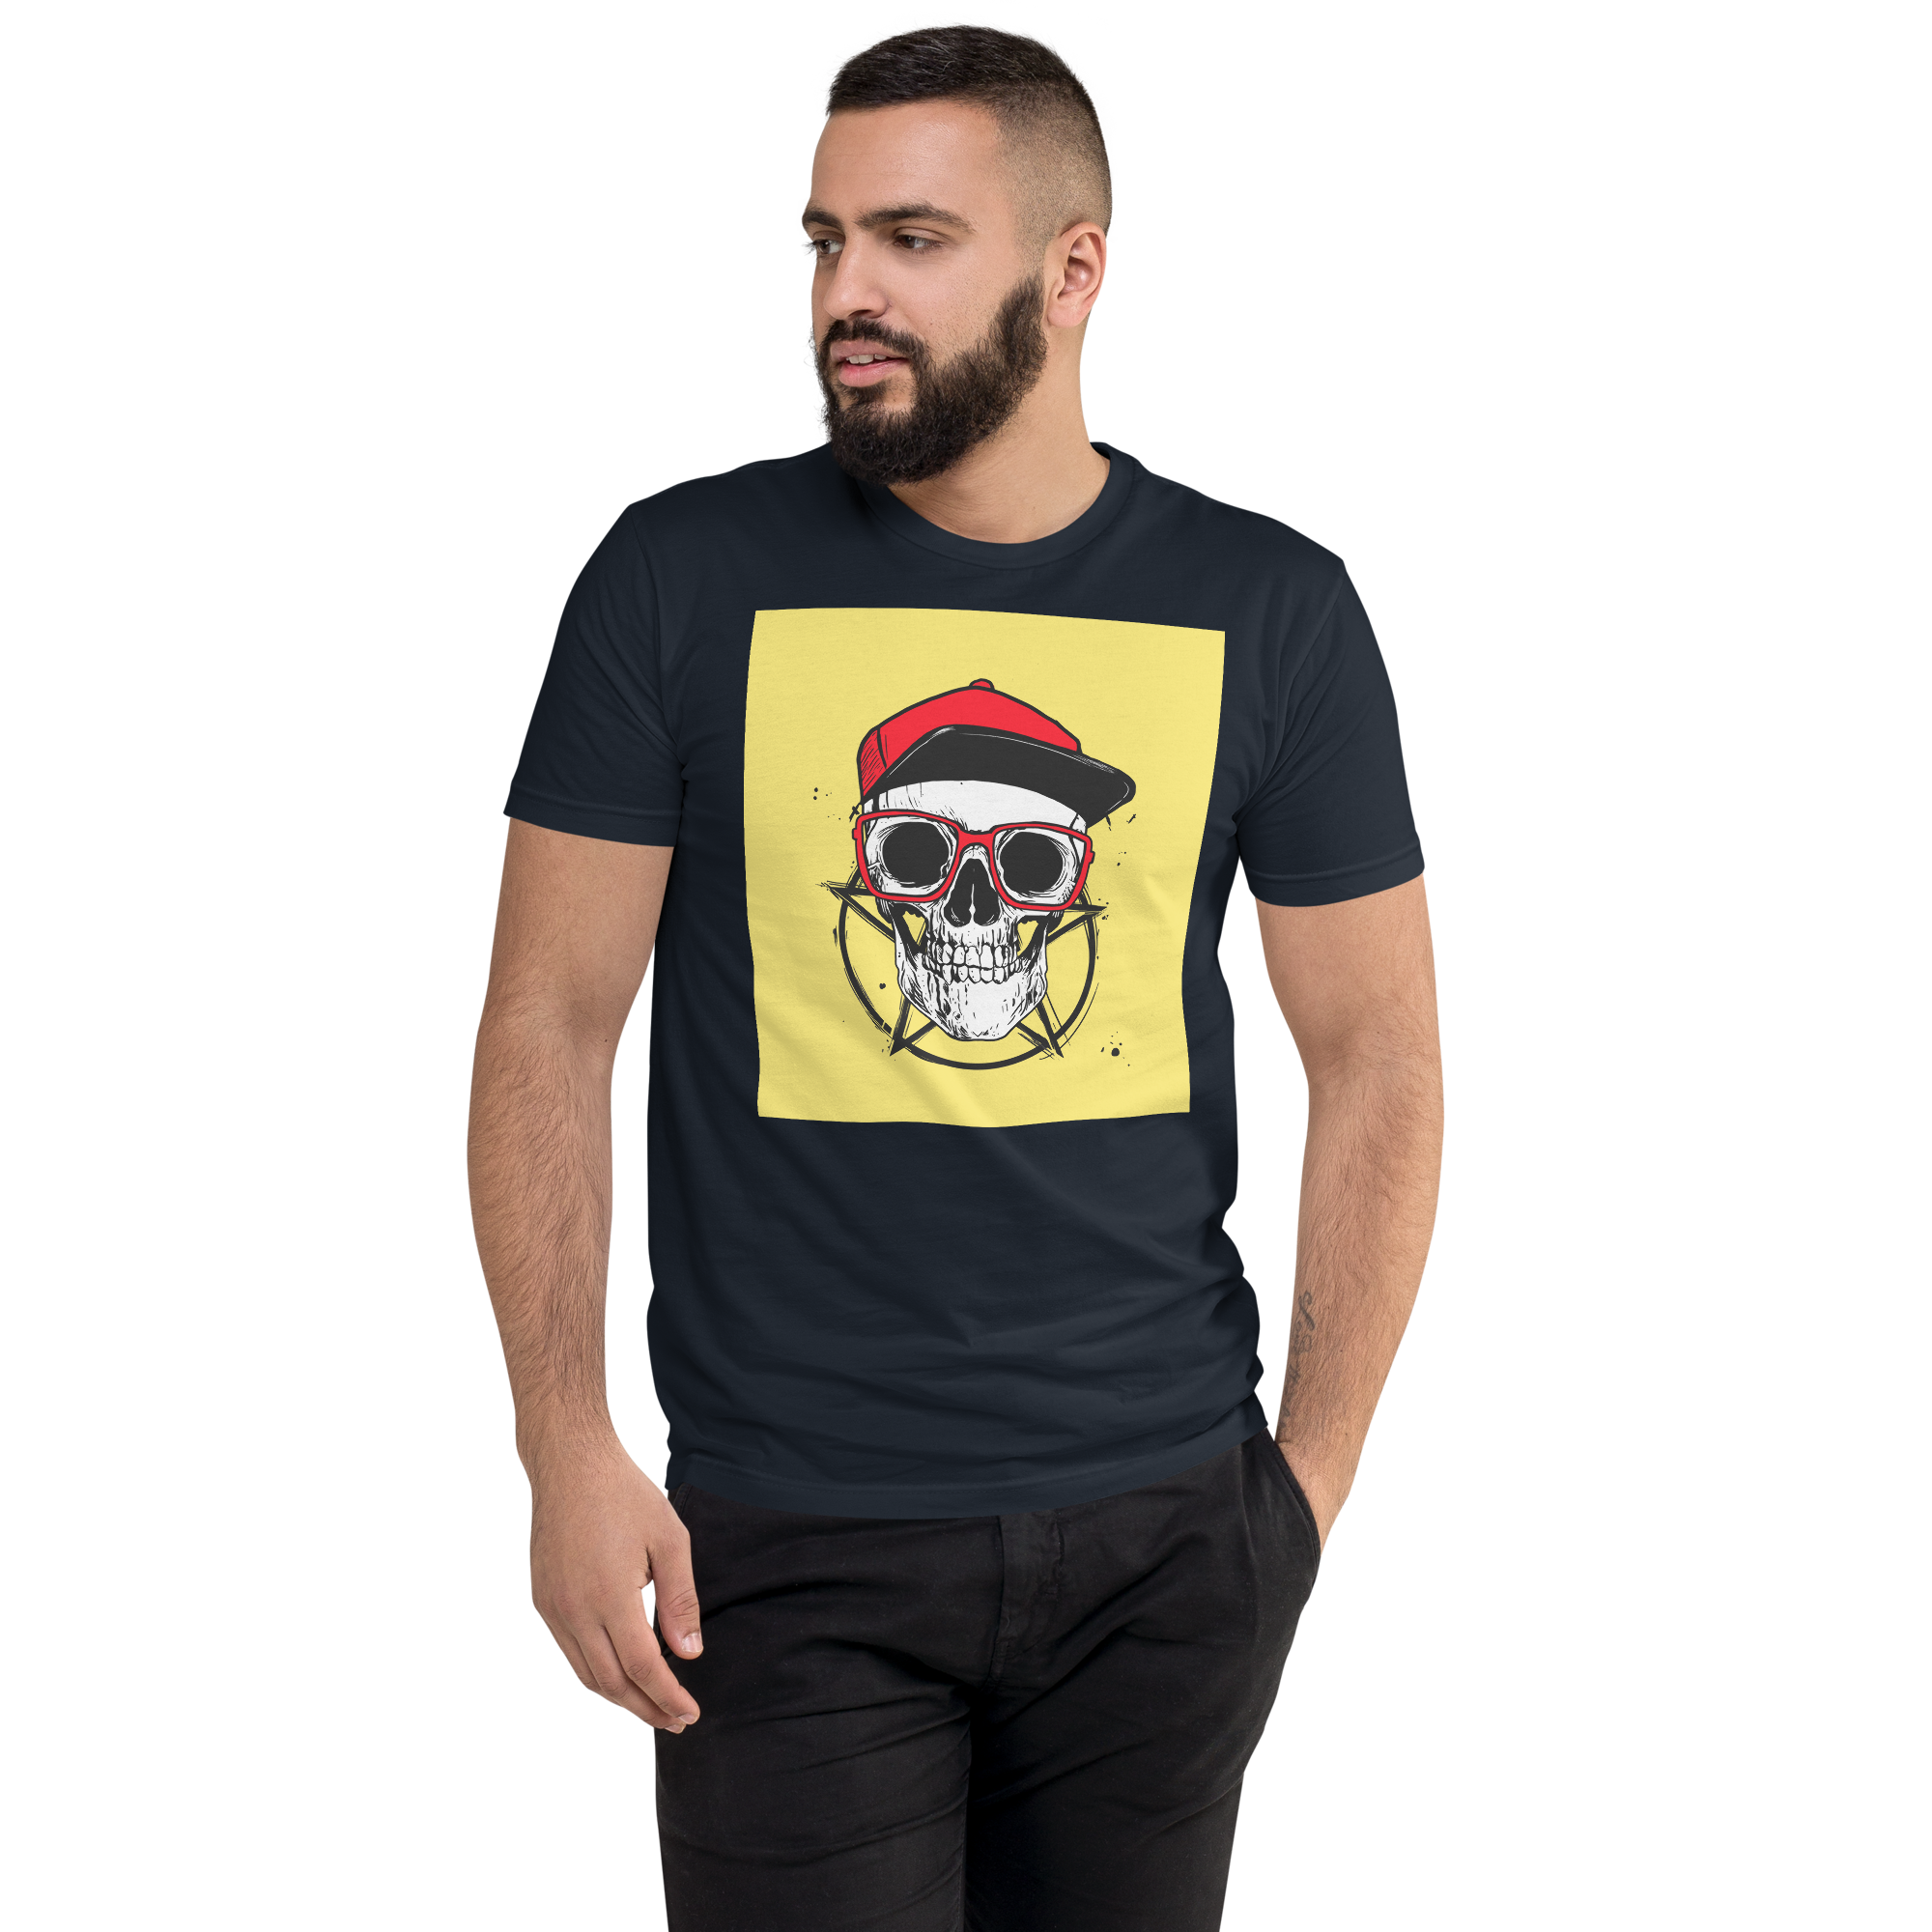 Skull With Hat Short Sleeve T-shirt New Fashion